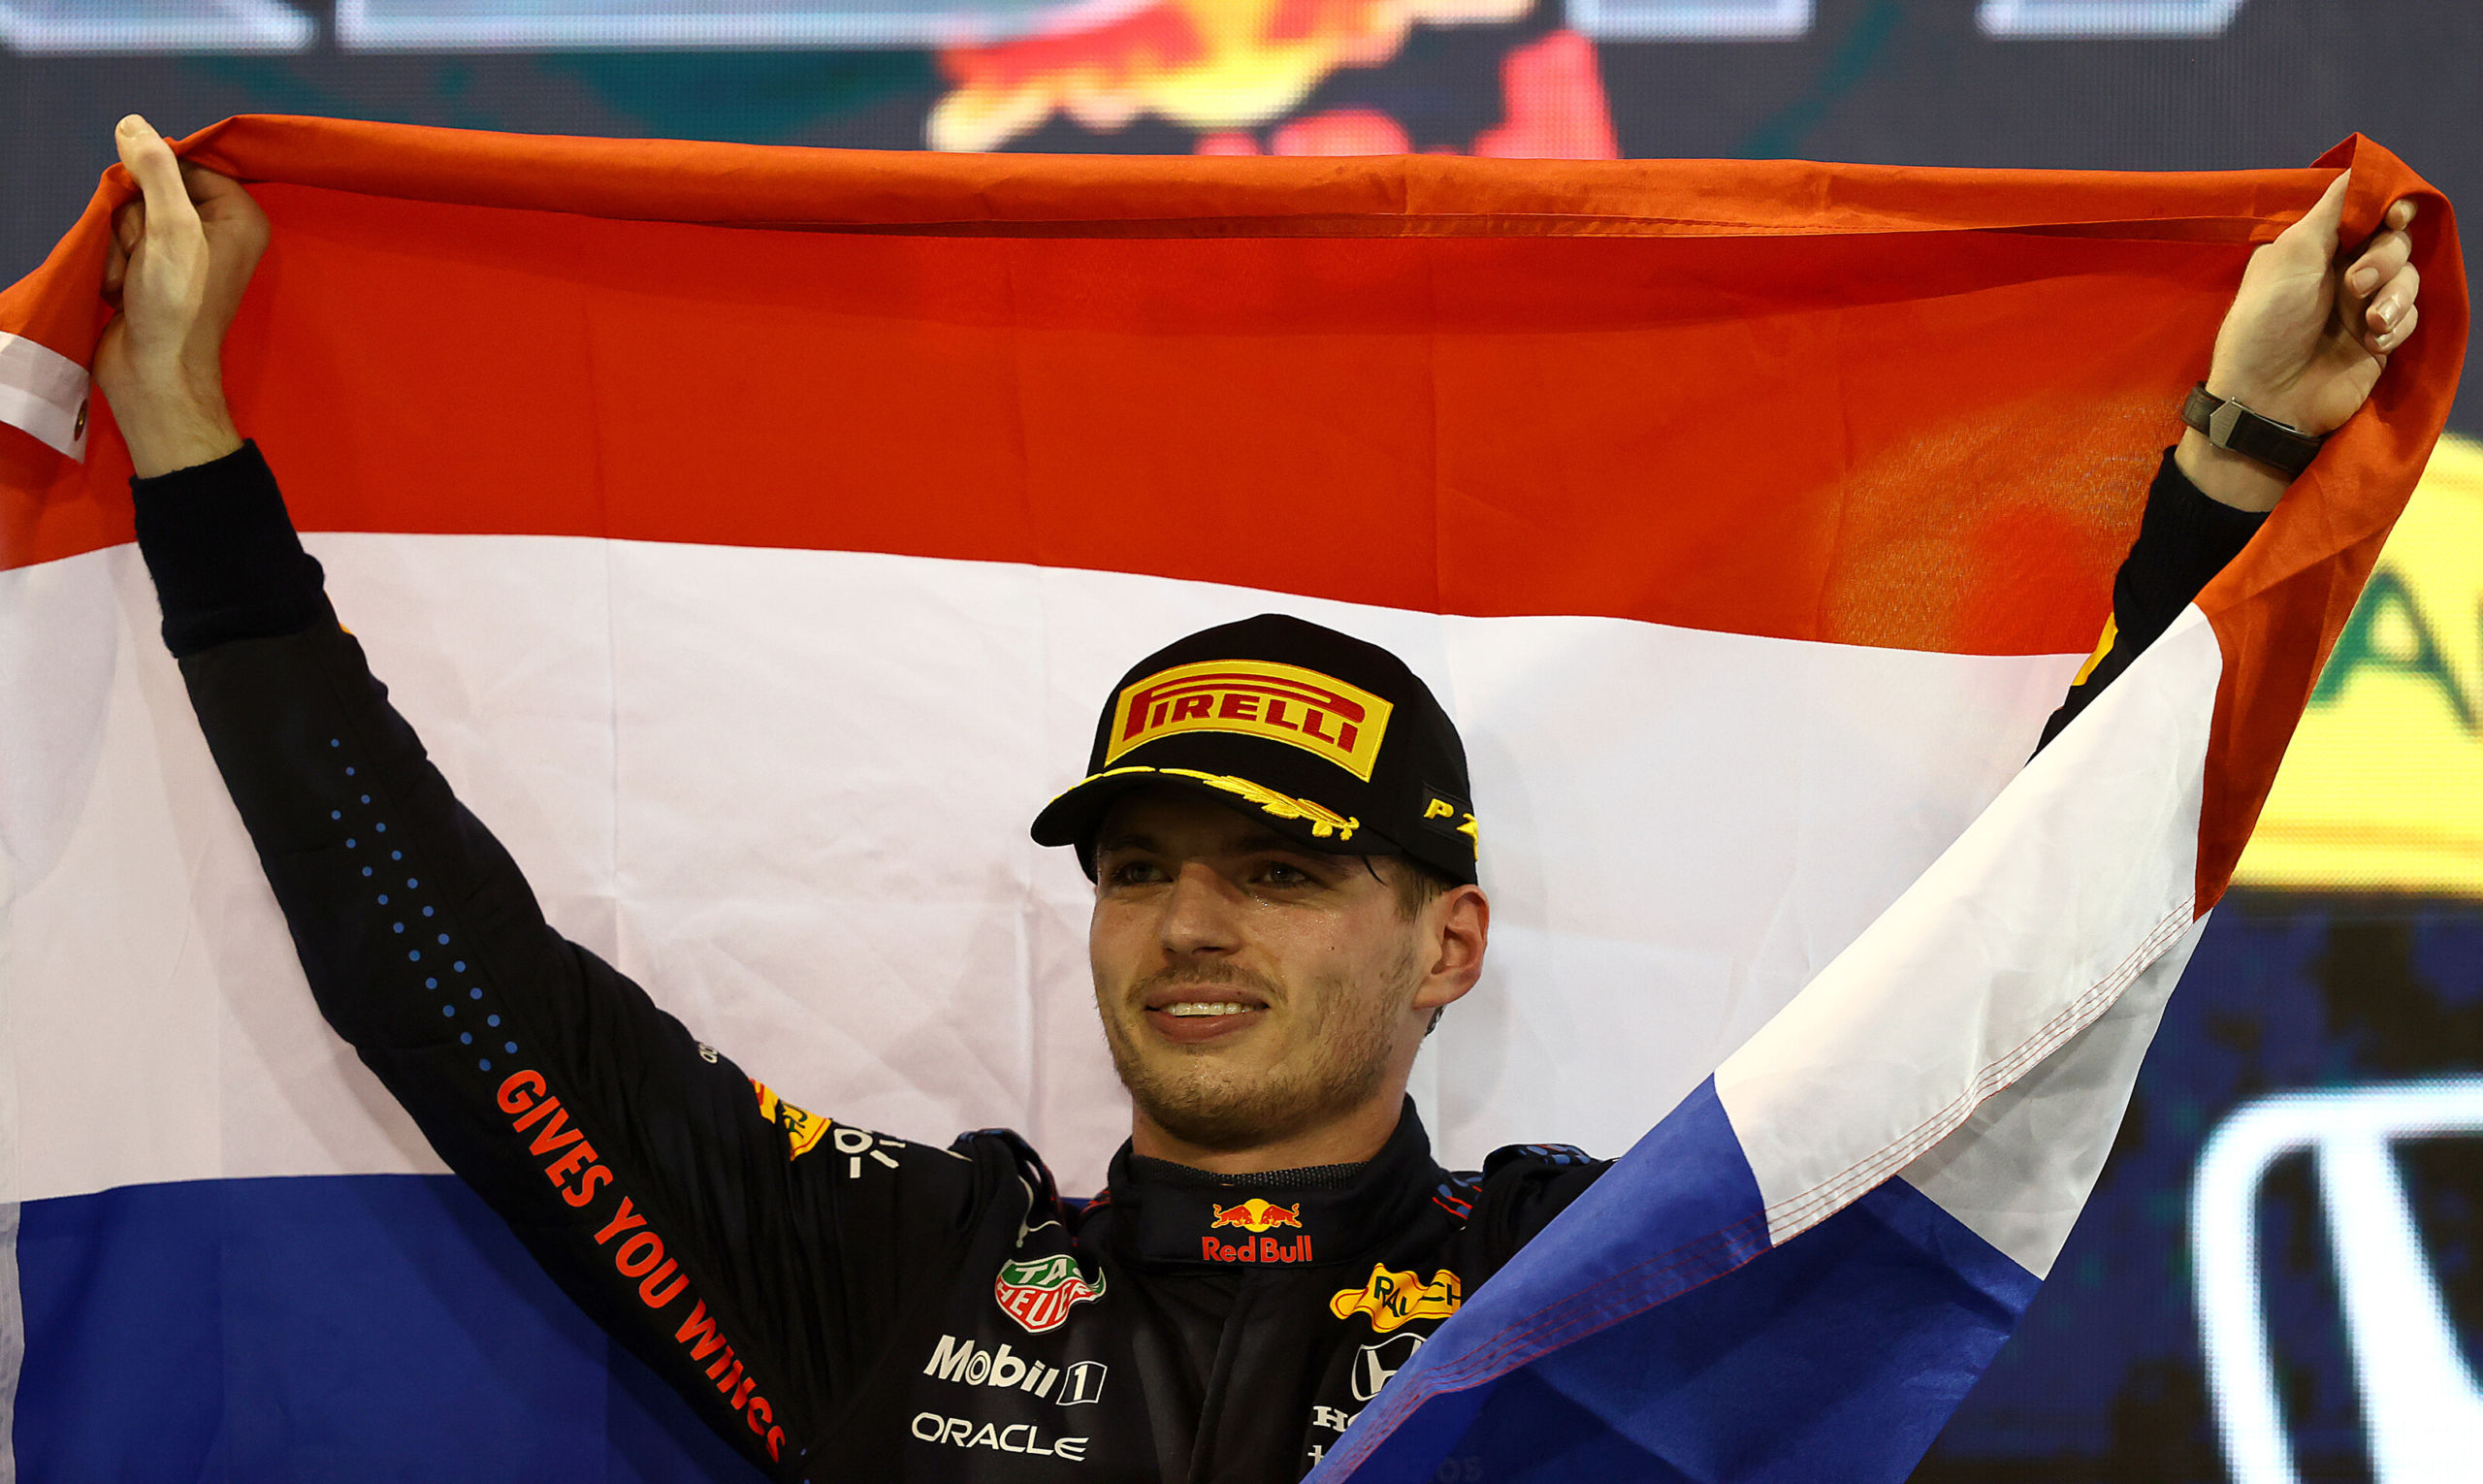 ABU DHABI, UNITED ARAB EMIRATES - DECEMBER 12: Race winner and 2021 F1 World Drivers Champion Max Verstappen of Netherlands and Red Bull Racing celebrates on the podium during the F1 Grand Prix of Abu Dhabi at Yas Marina Circuit on December 12, 2021 in Abu Dhabi, United Arab Emirates. (Photo by Bryn Lennon/Getty Images) // Getty Images / Red Bull Content Pool // SI202112120595 // Usage for editorial use only //